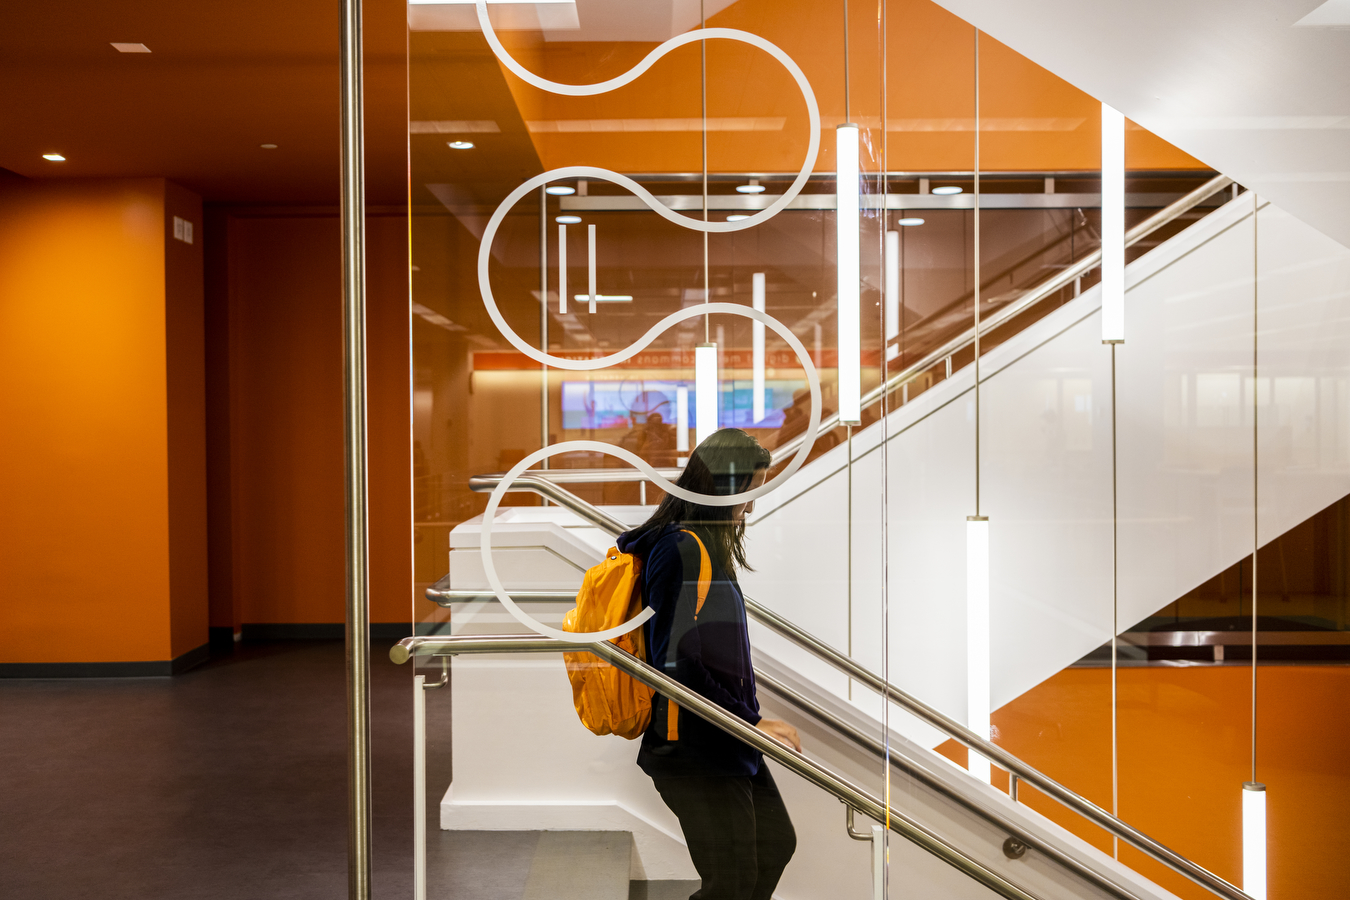 A person is walking past a glass wall covered in white curved lines as part of Snell Library's new look.